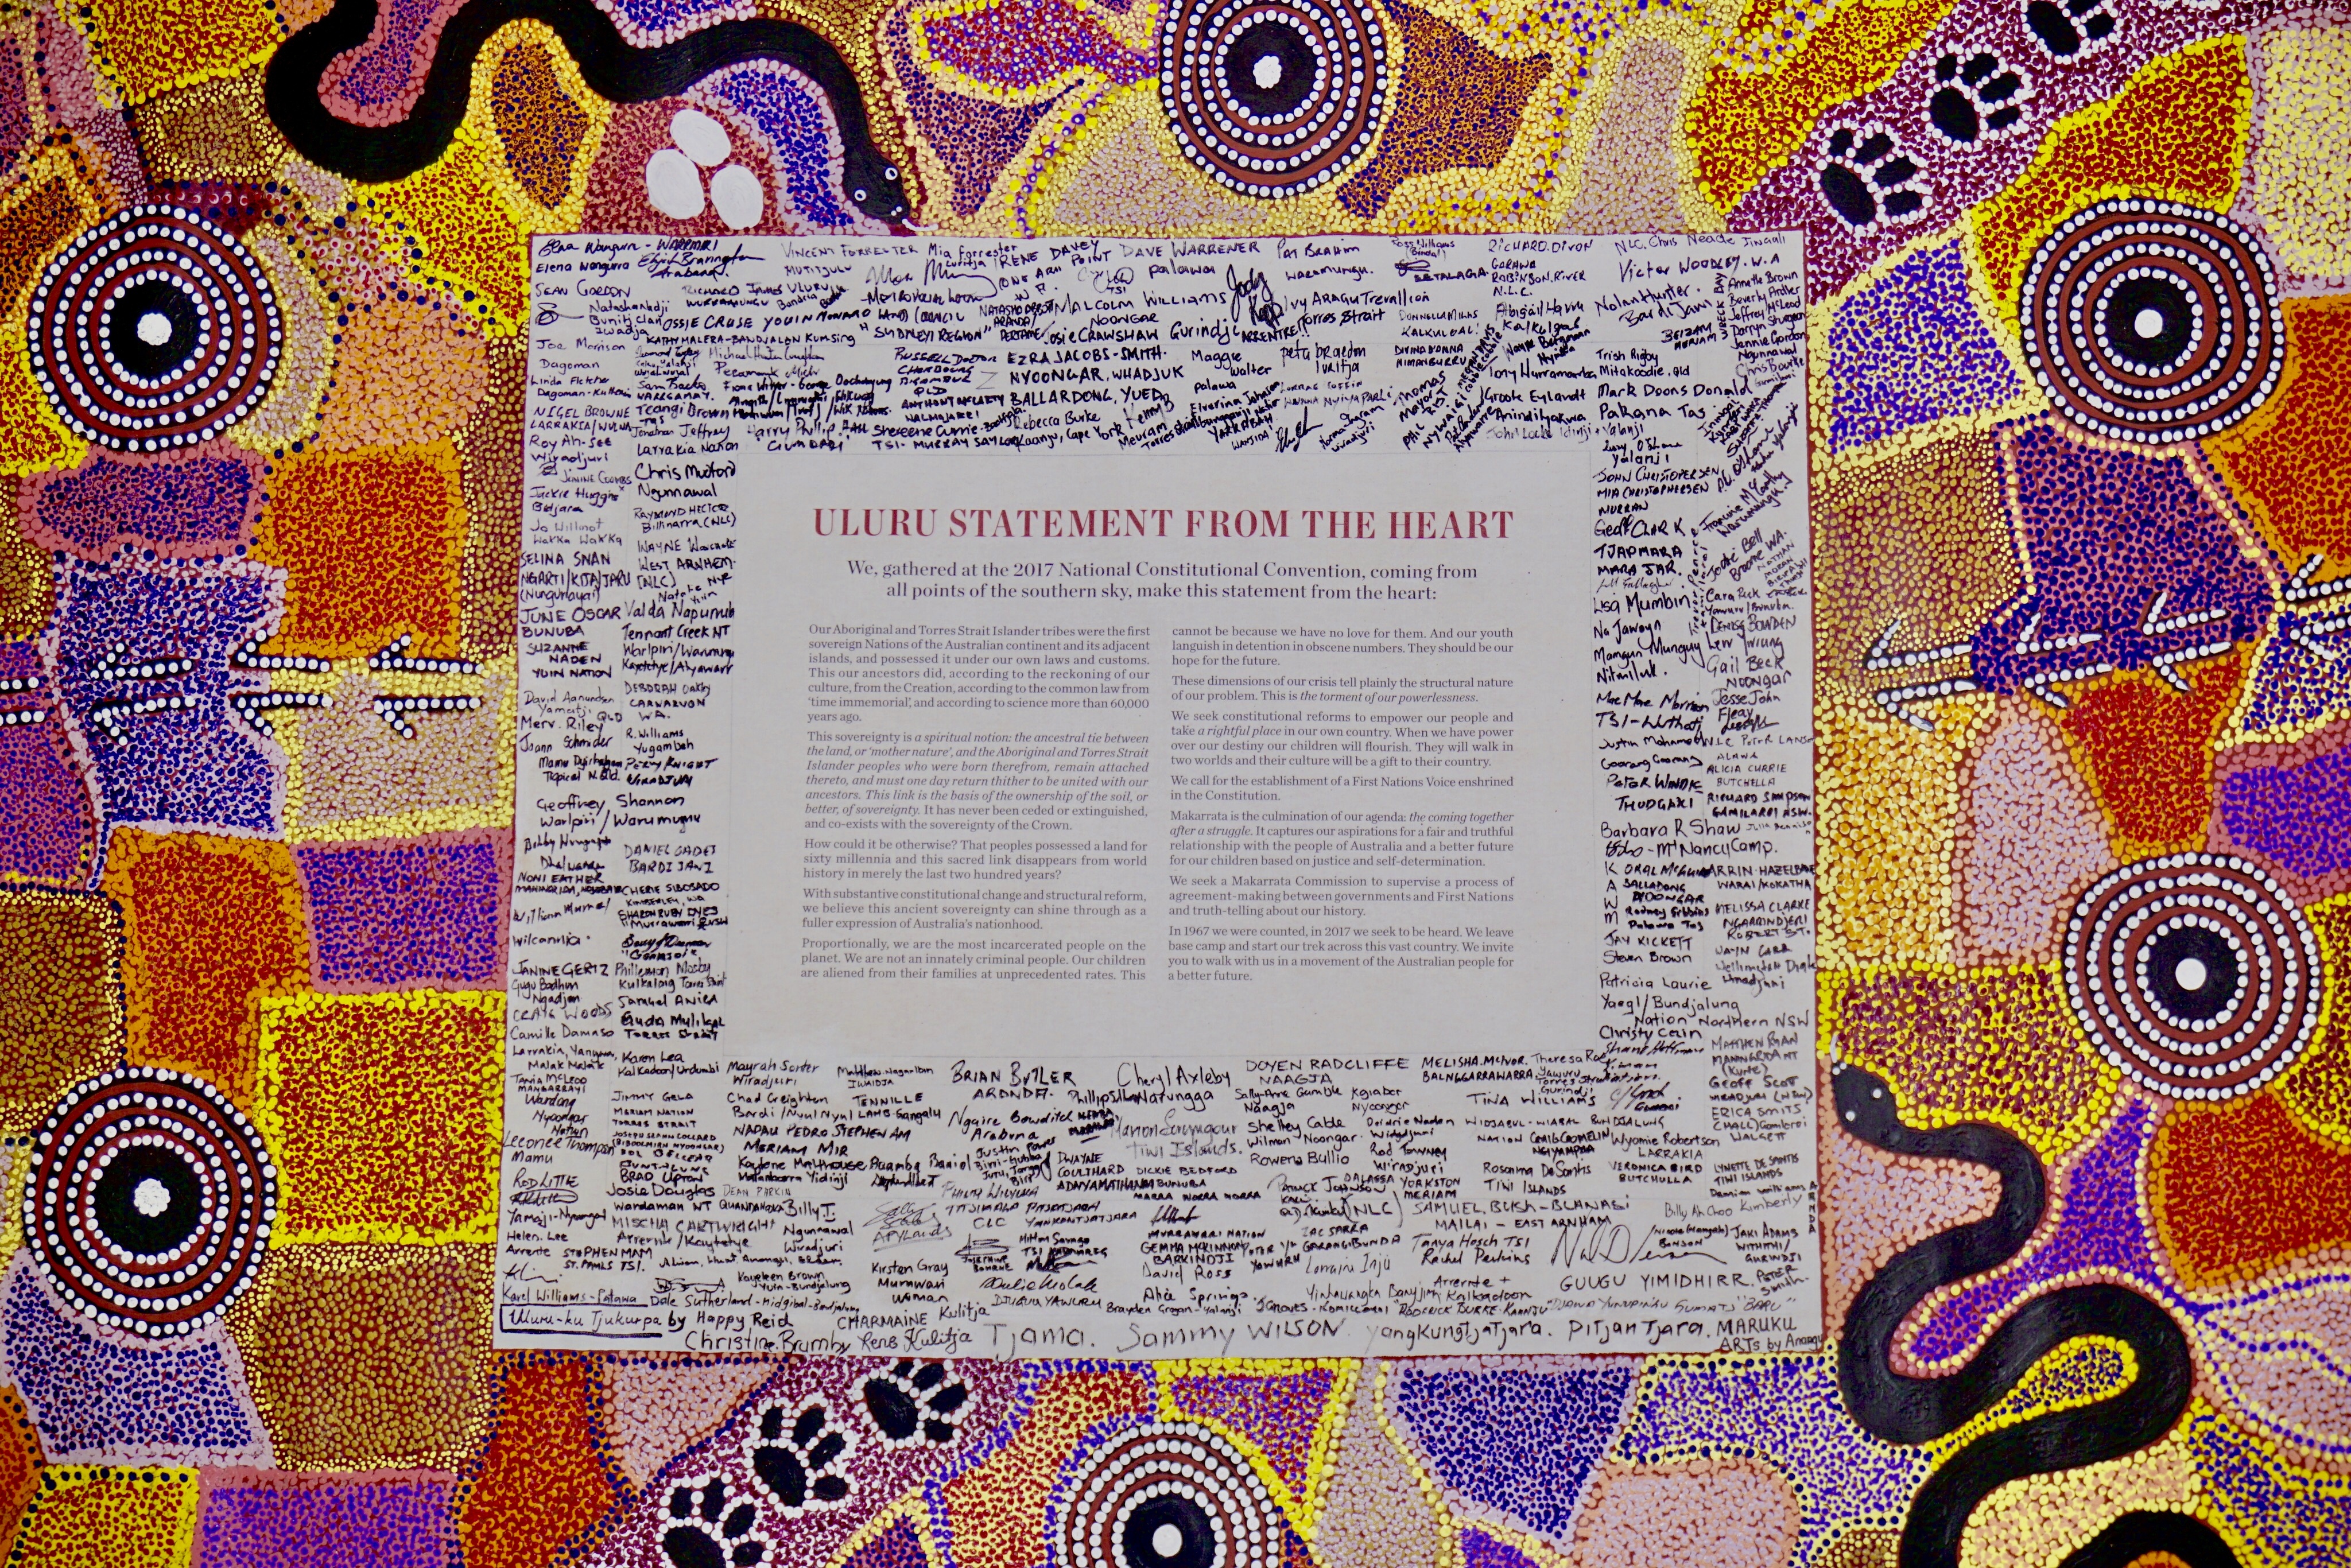 The Uluru Statement from the Heart (photograph via From the Heart)